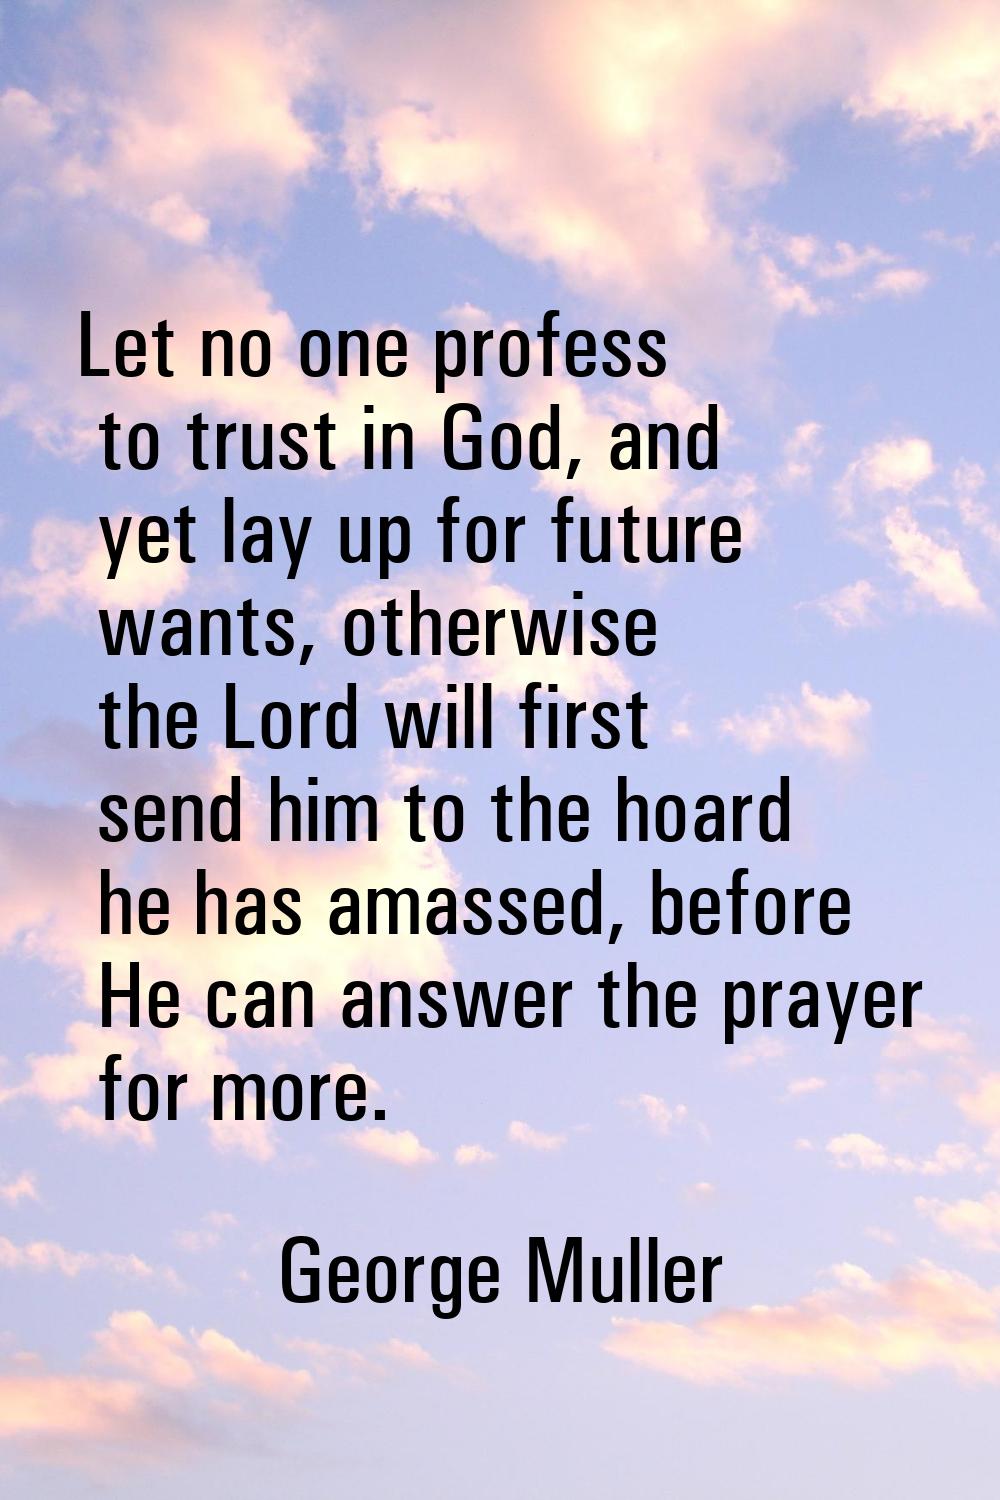 Let no one profess to trust in God, and yet lay up for future wants, otherwise the Lord will first 